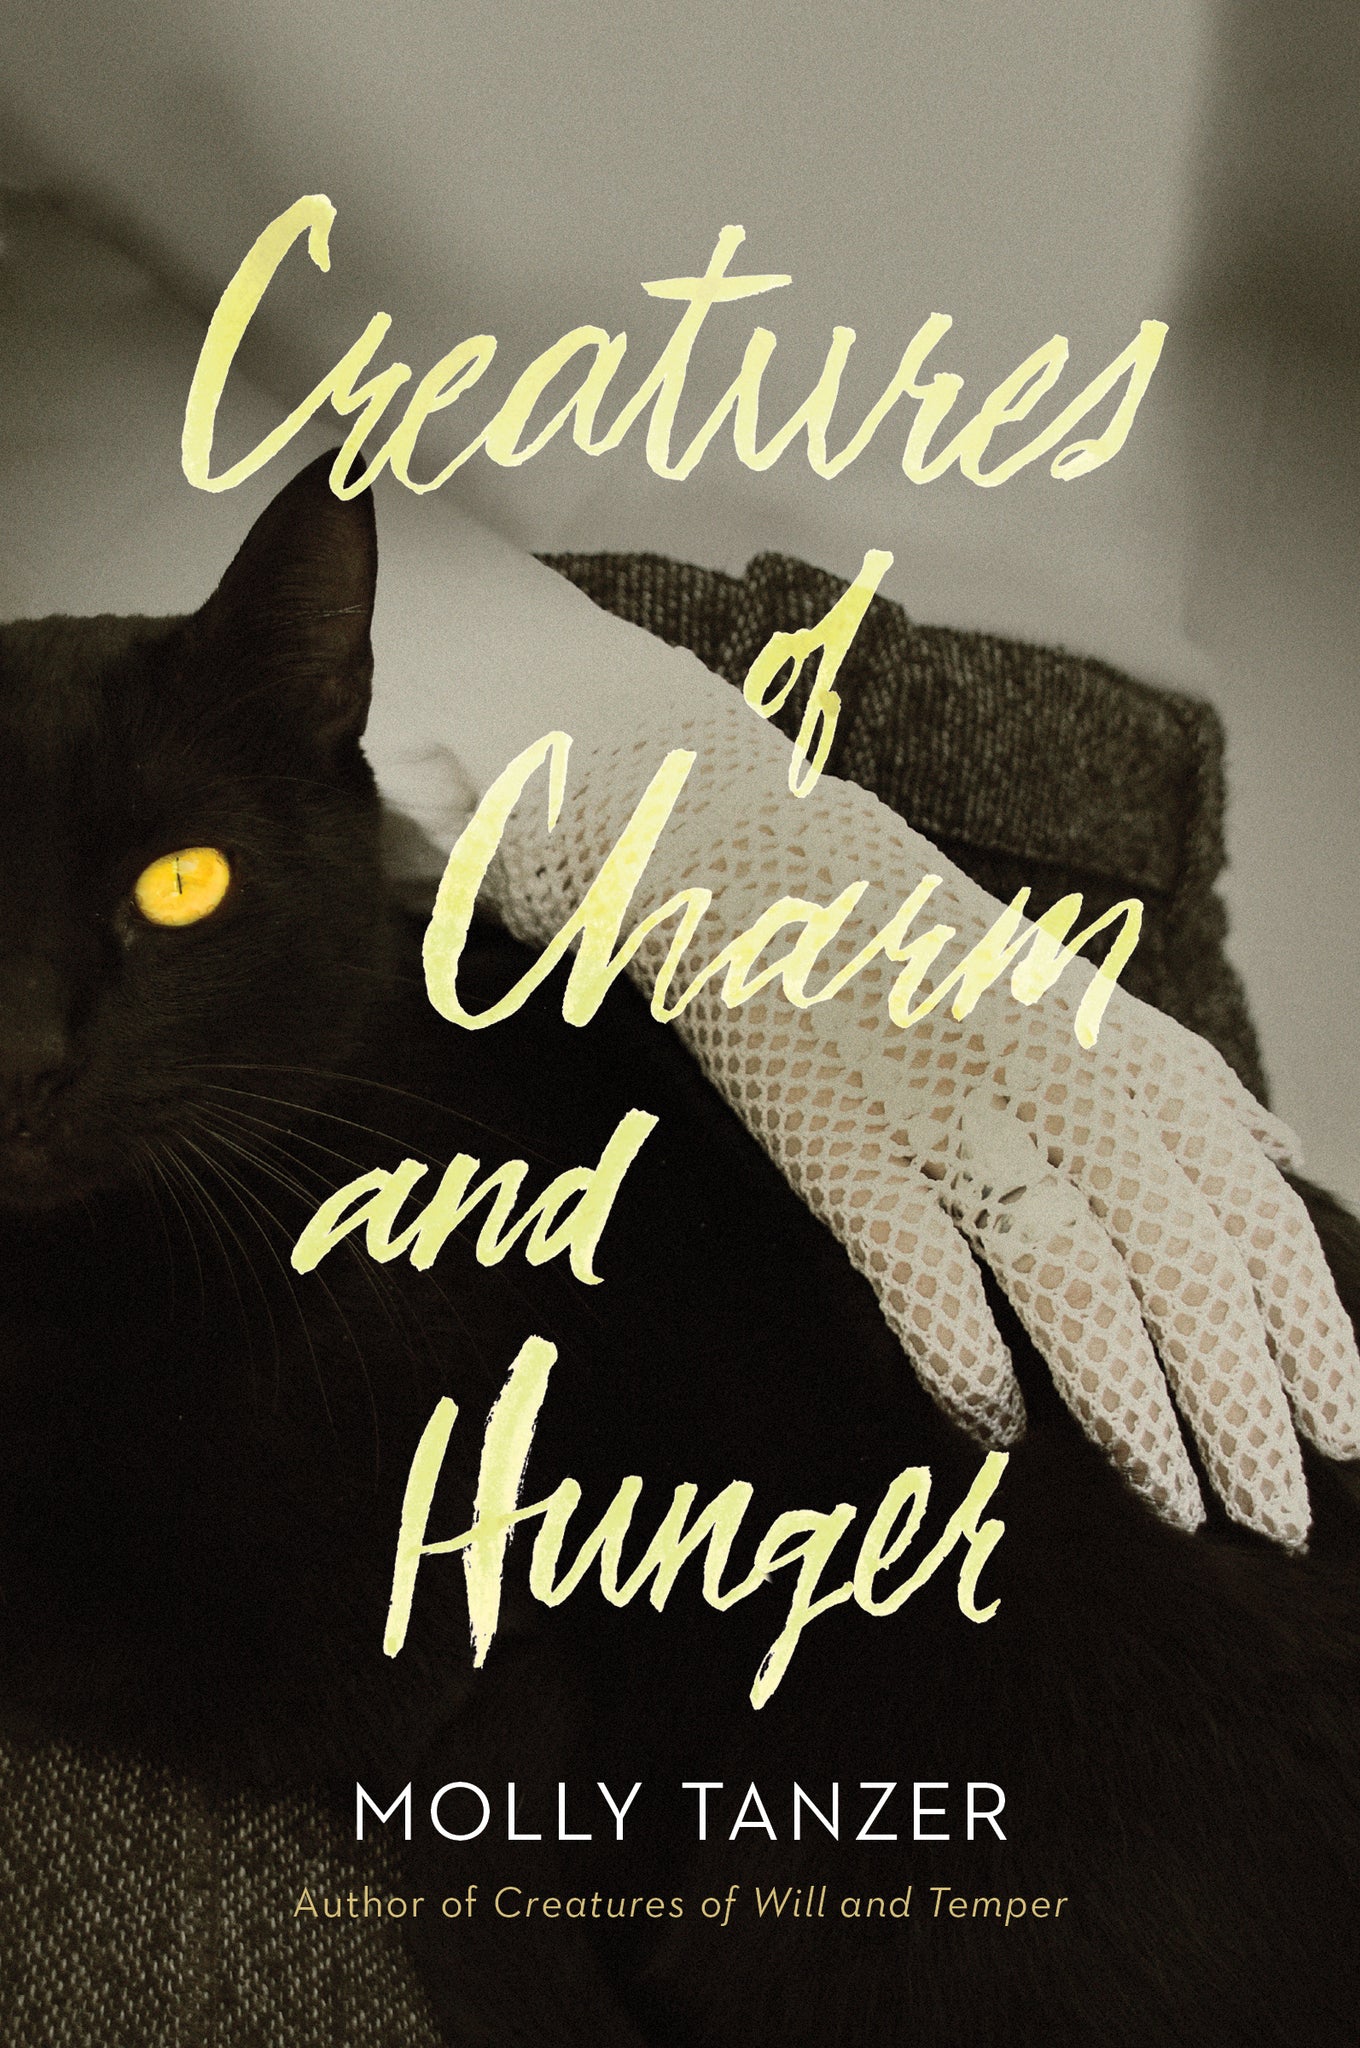 Diabolist's Library #3: Creatures of Charm & Hunger by Molly Tanzer